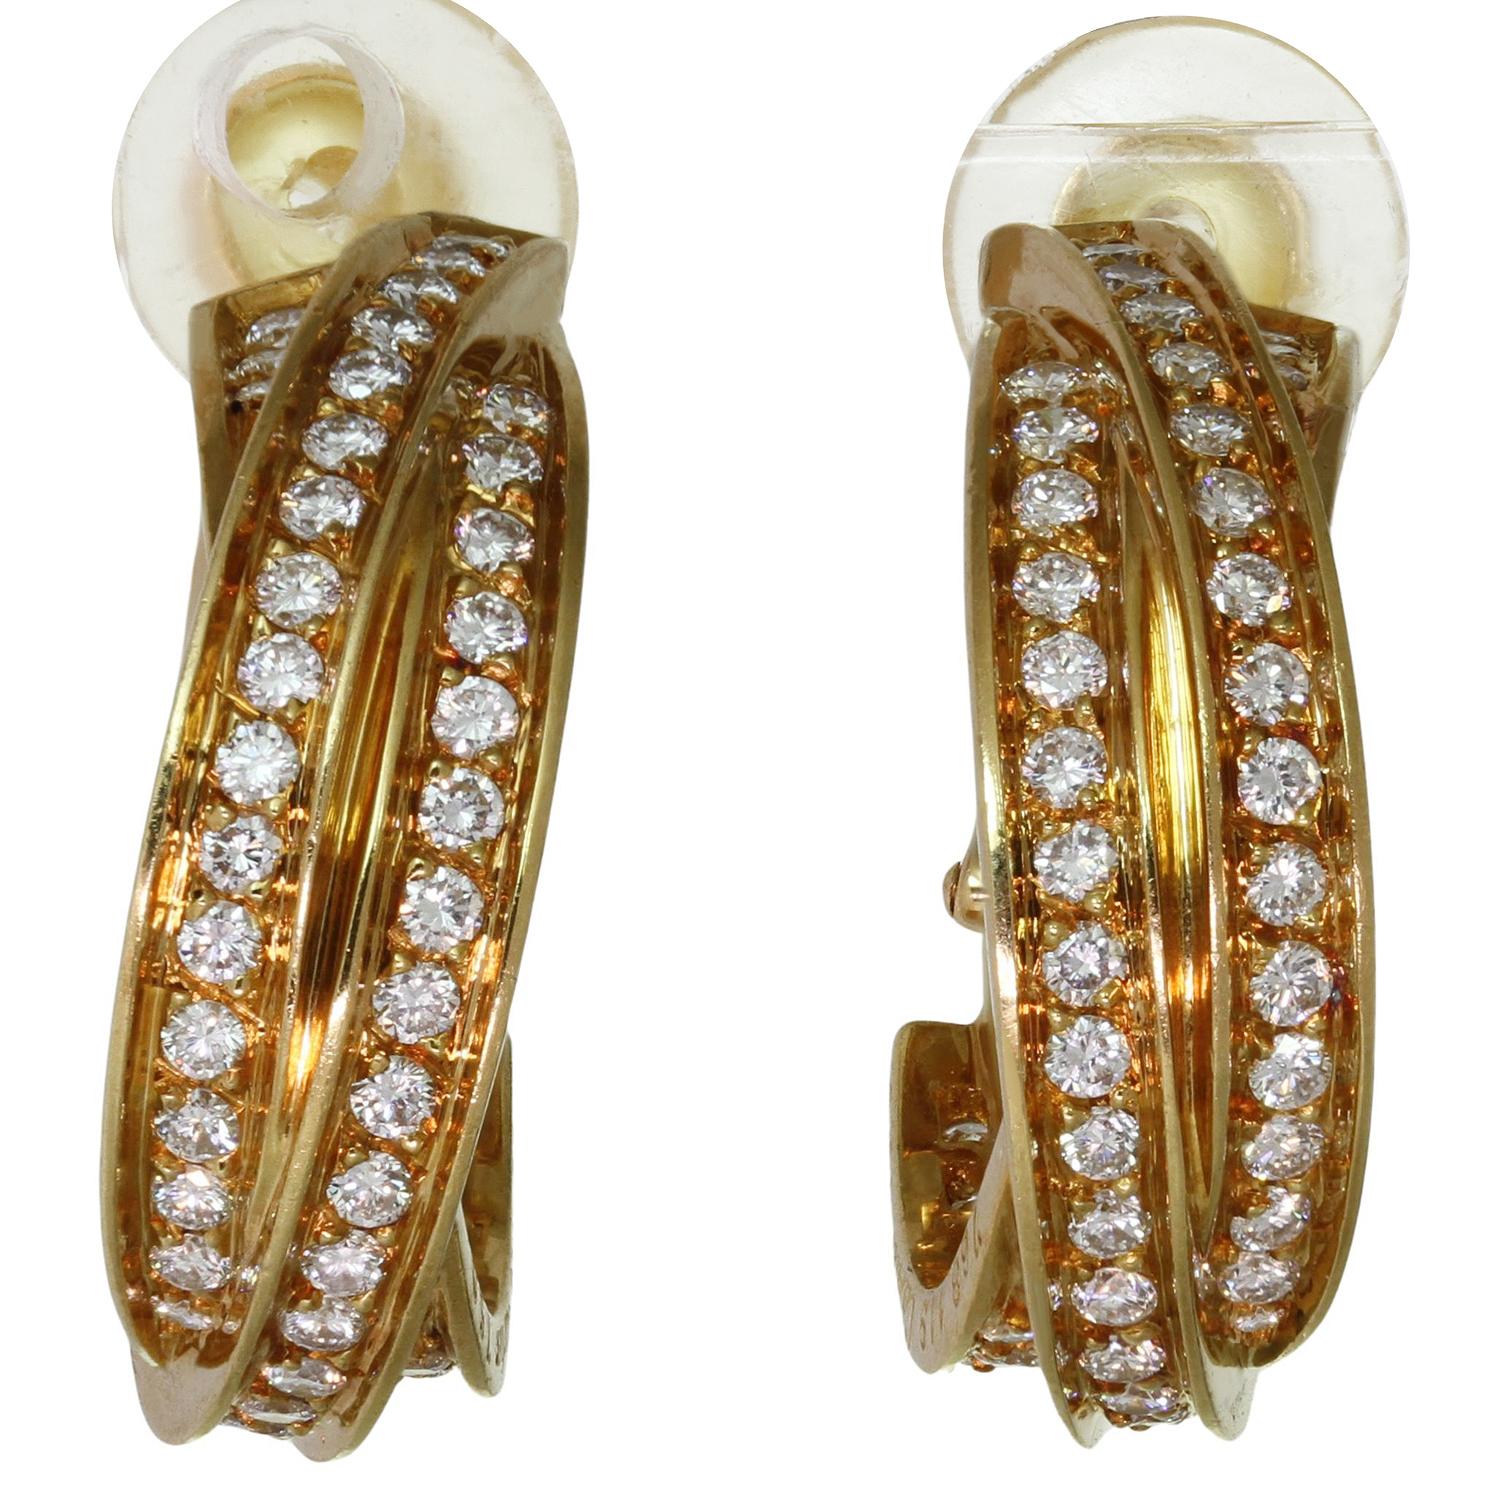 These stunning Cartier earrings from the classic Trinity de Cartier collection feature a hoop lever-back design with three interlocking bands crafted in 18k yellow gold and set with brilliant-cut round diamonds. Made in France circa 2000s.